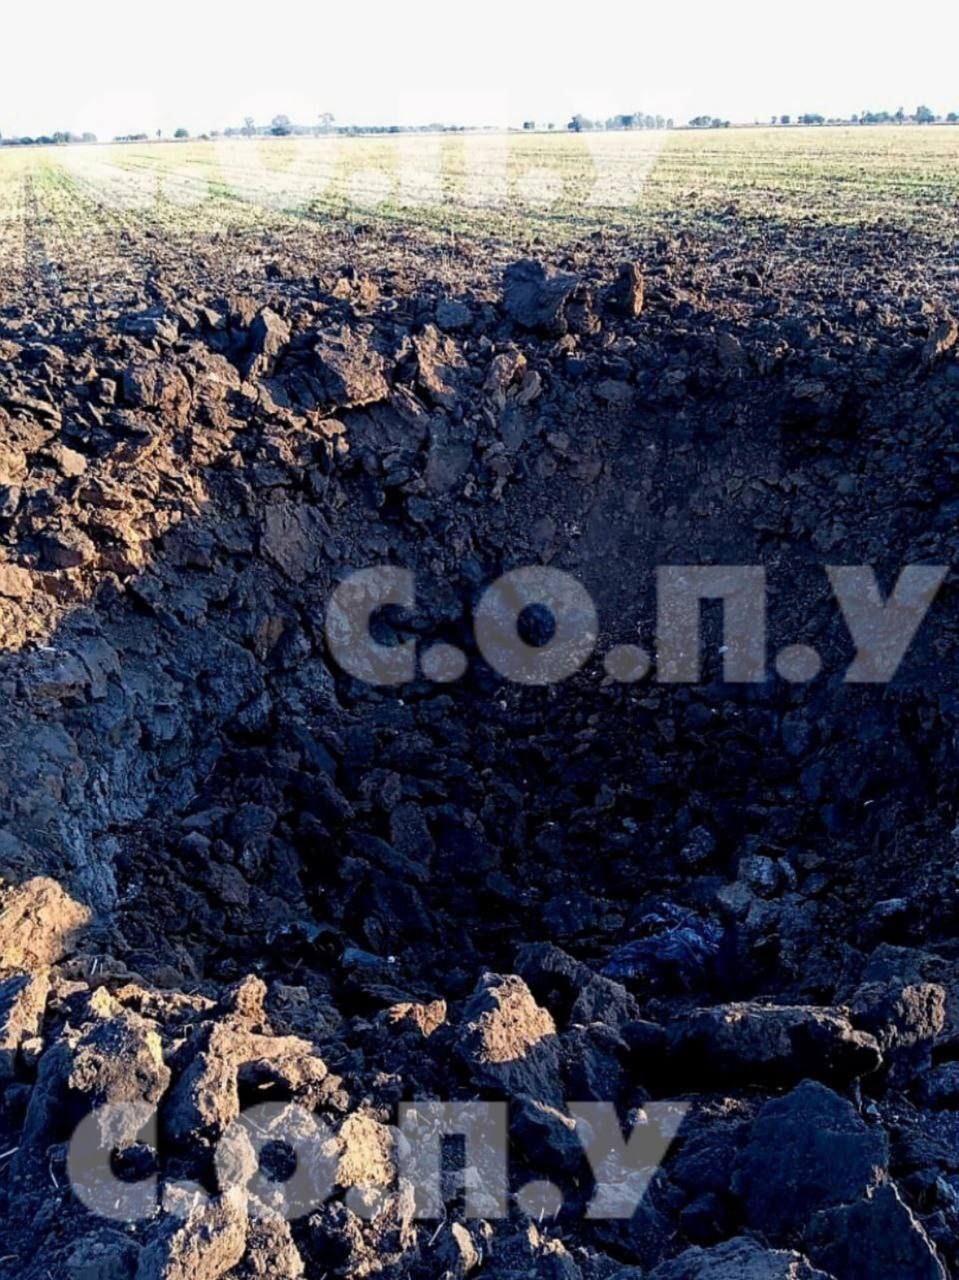 The occupants struck an agricultural enterprise in Odesa region: rescuers worked at the site. Photo